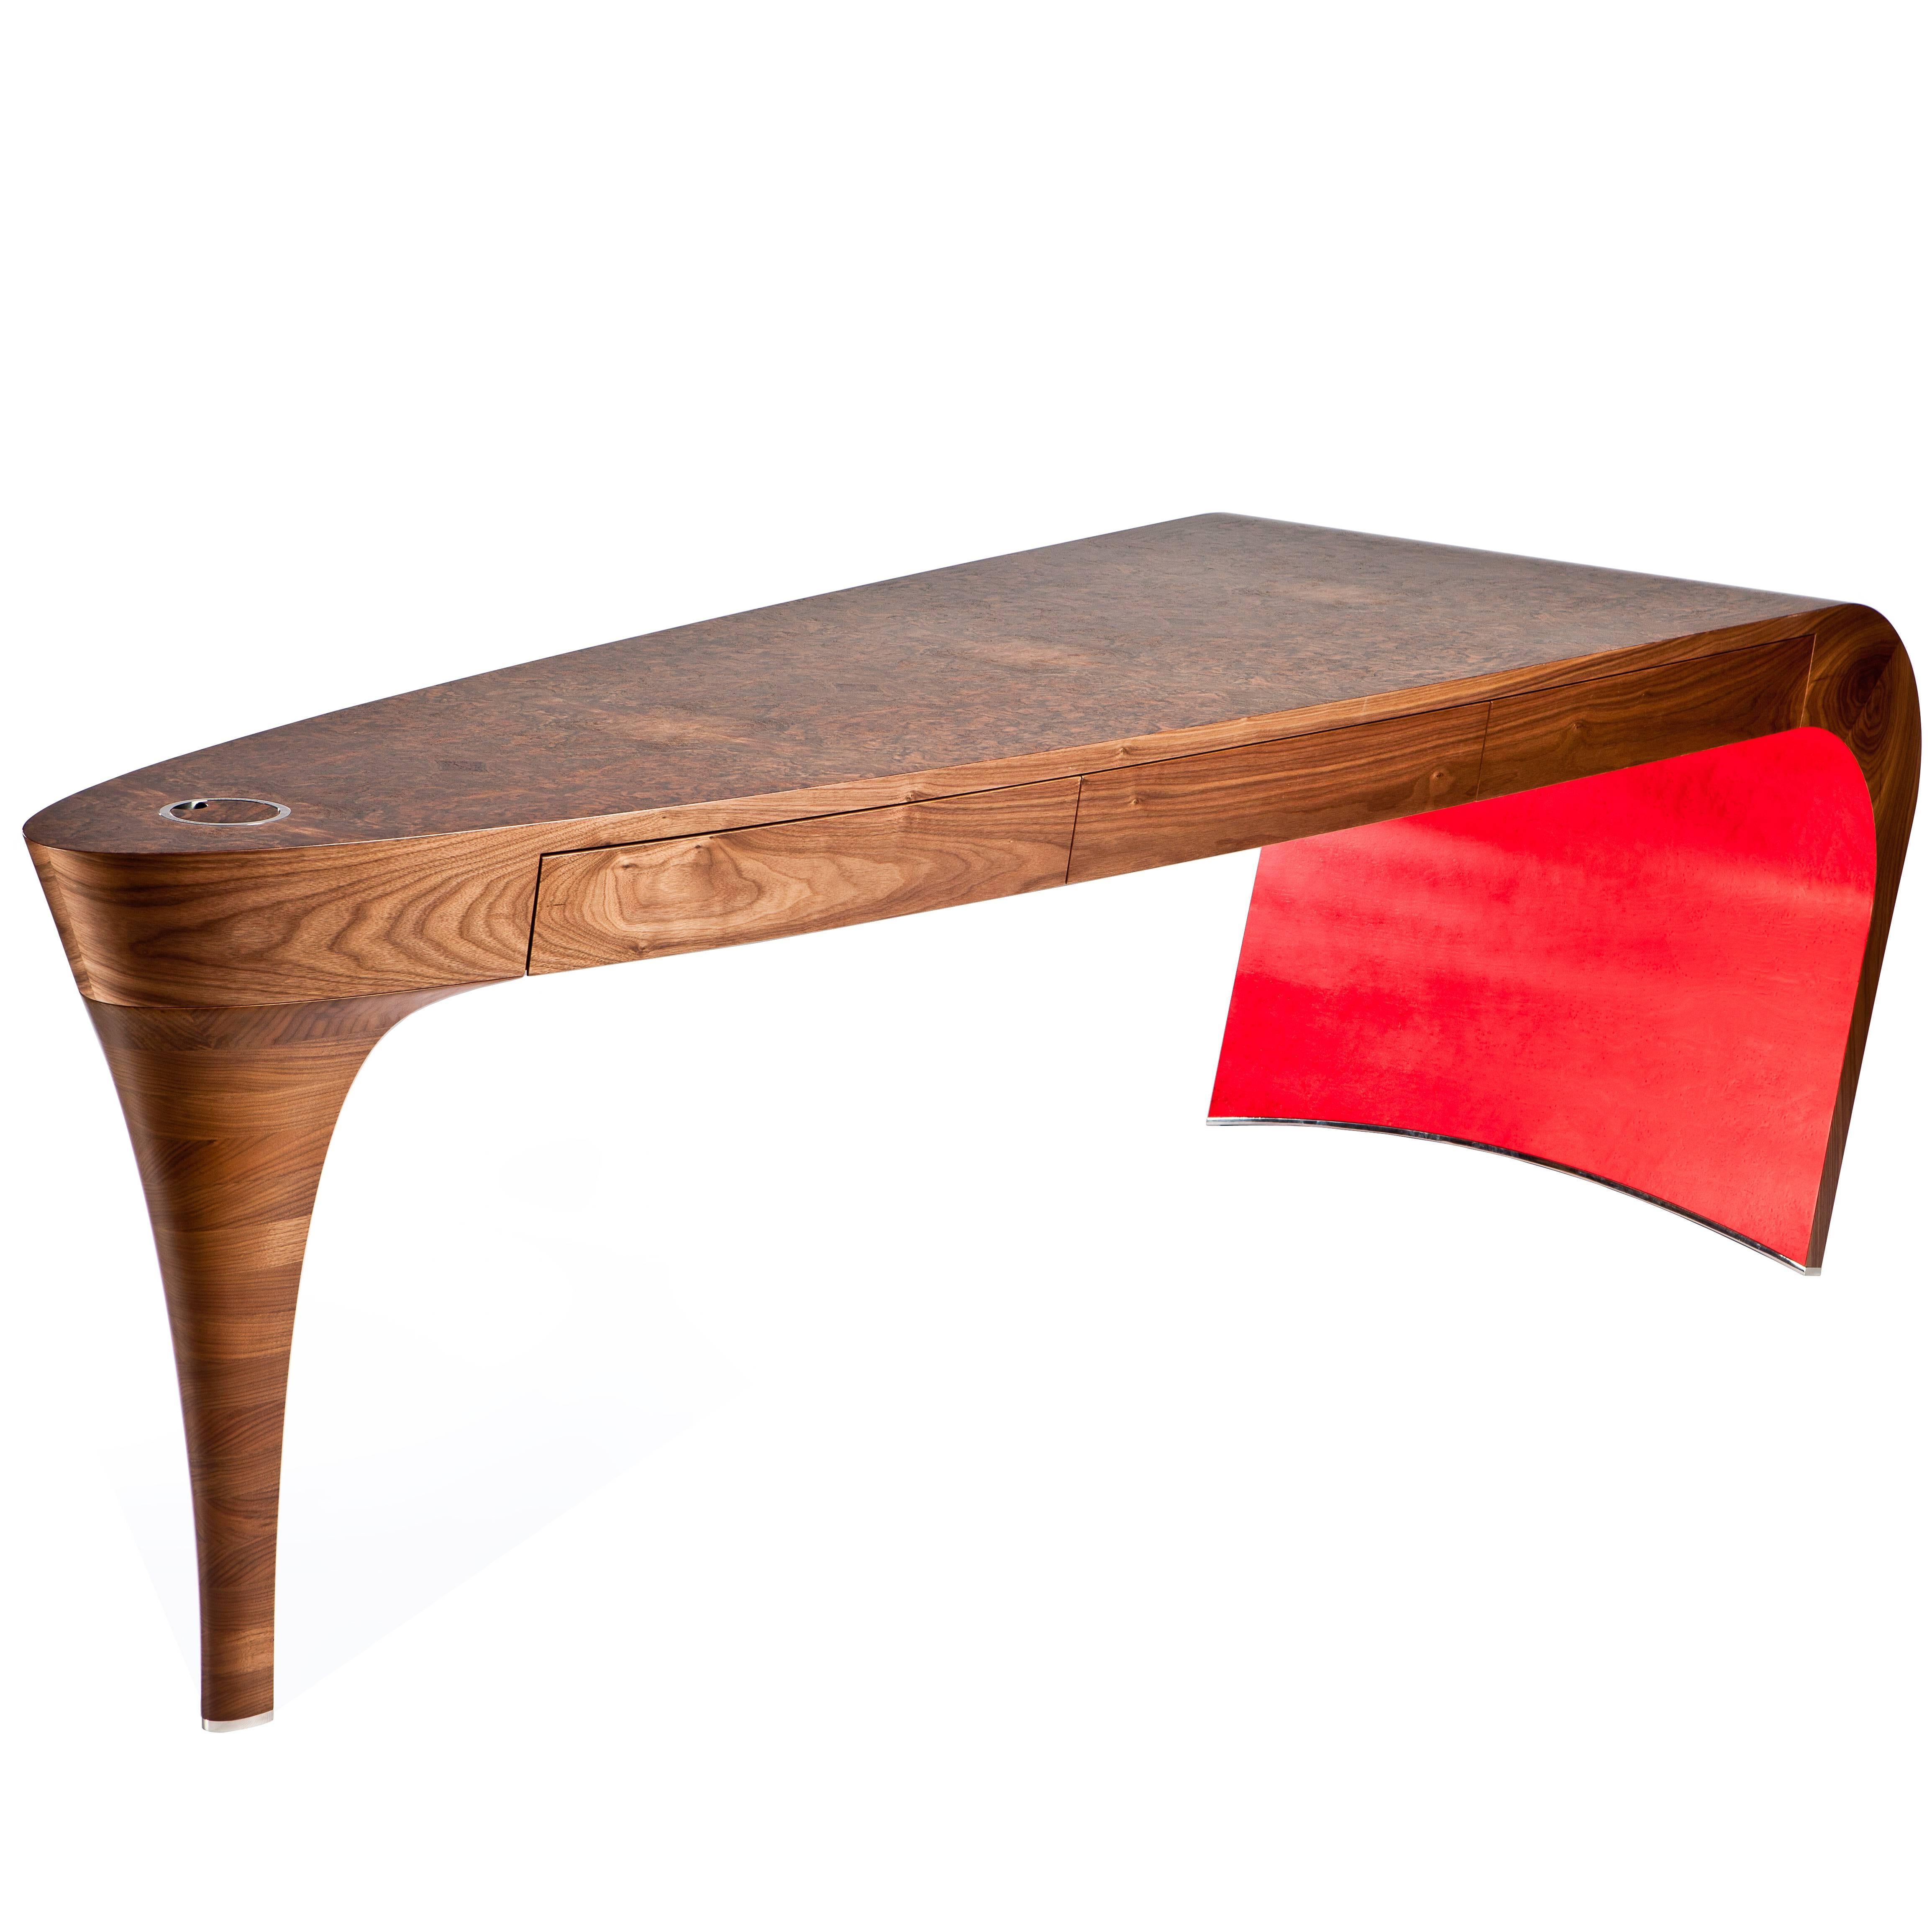 Walnut and Red Bird's-Eye Maple Stiletto Shoe Desk or Dressing Table For Sale